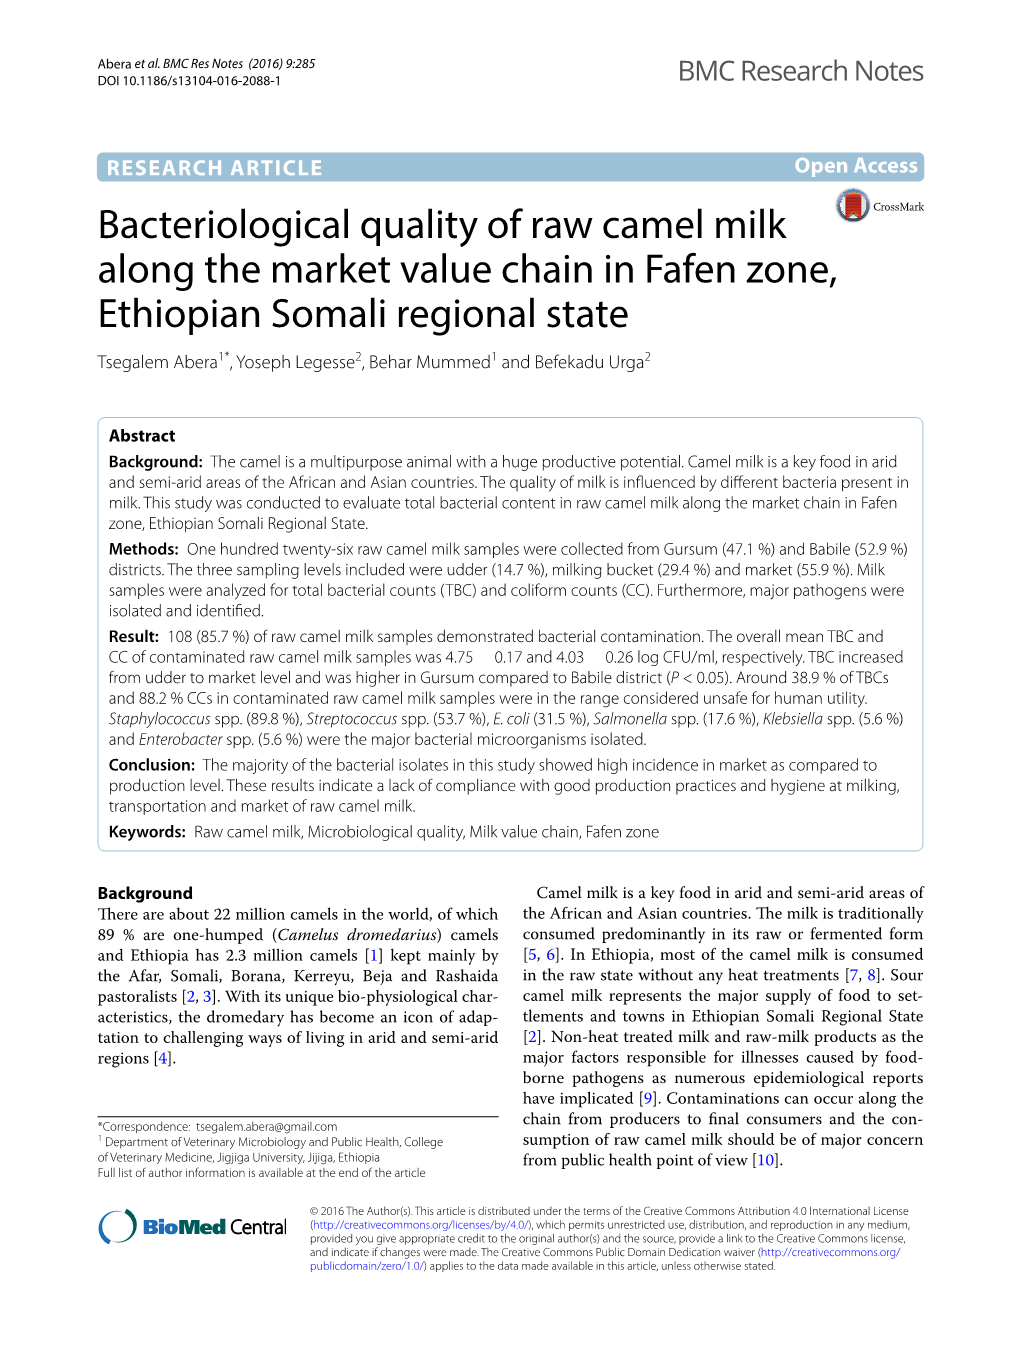 Bacteriological Quality of Raw Camel Milk Along the Market Value Chain In